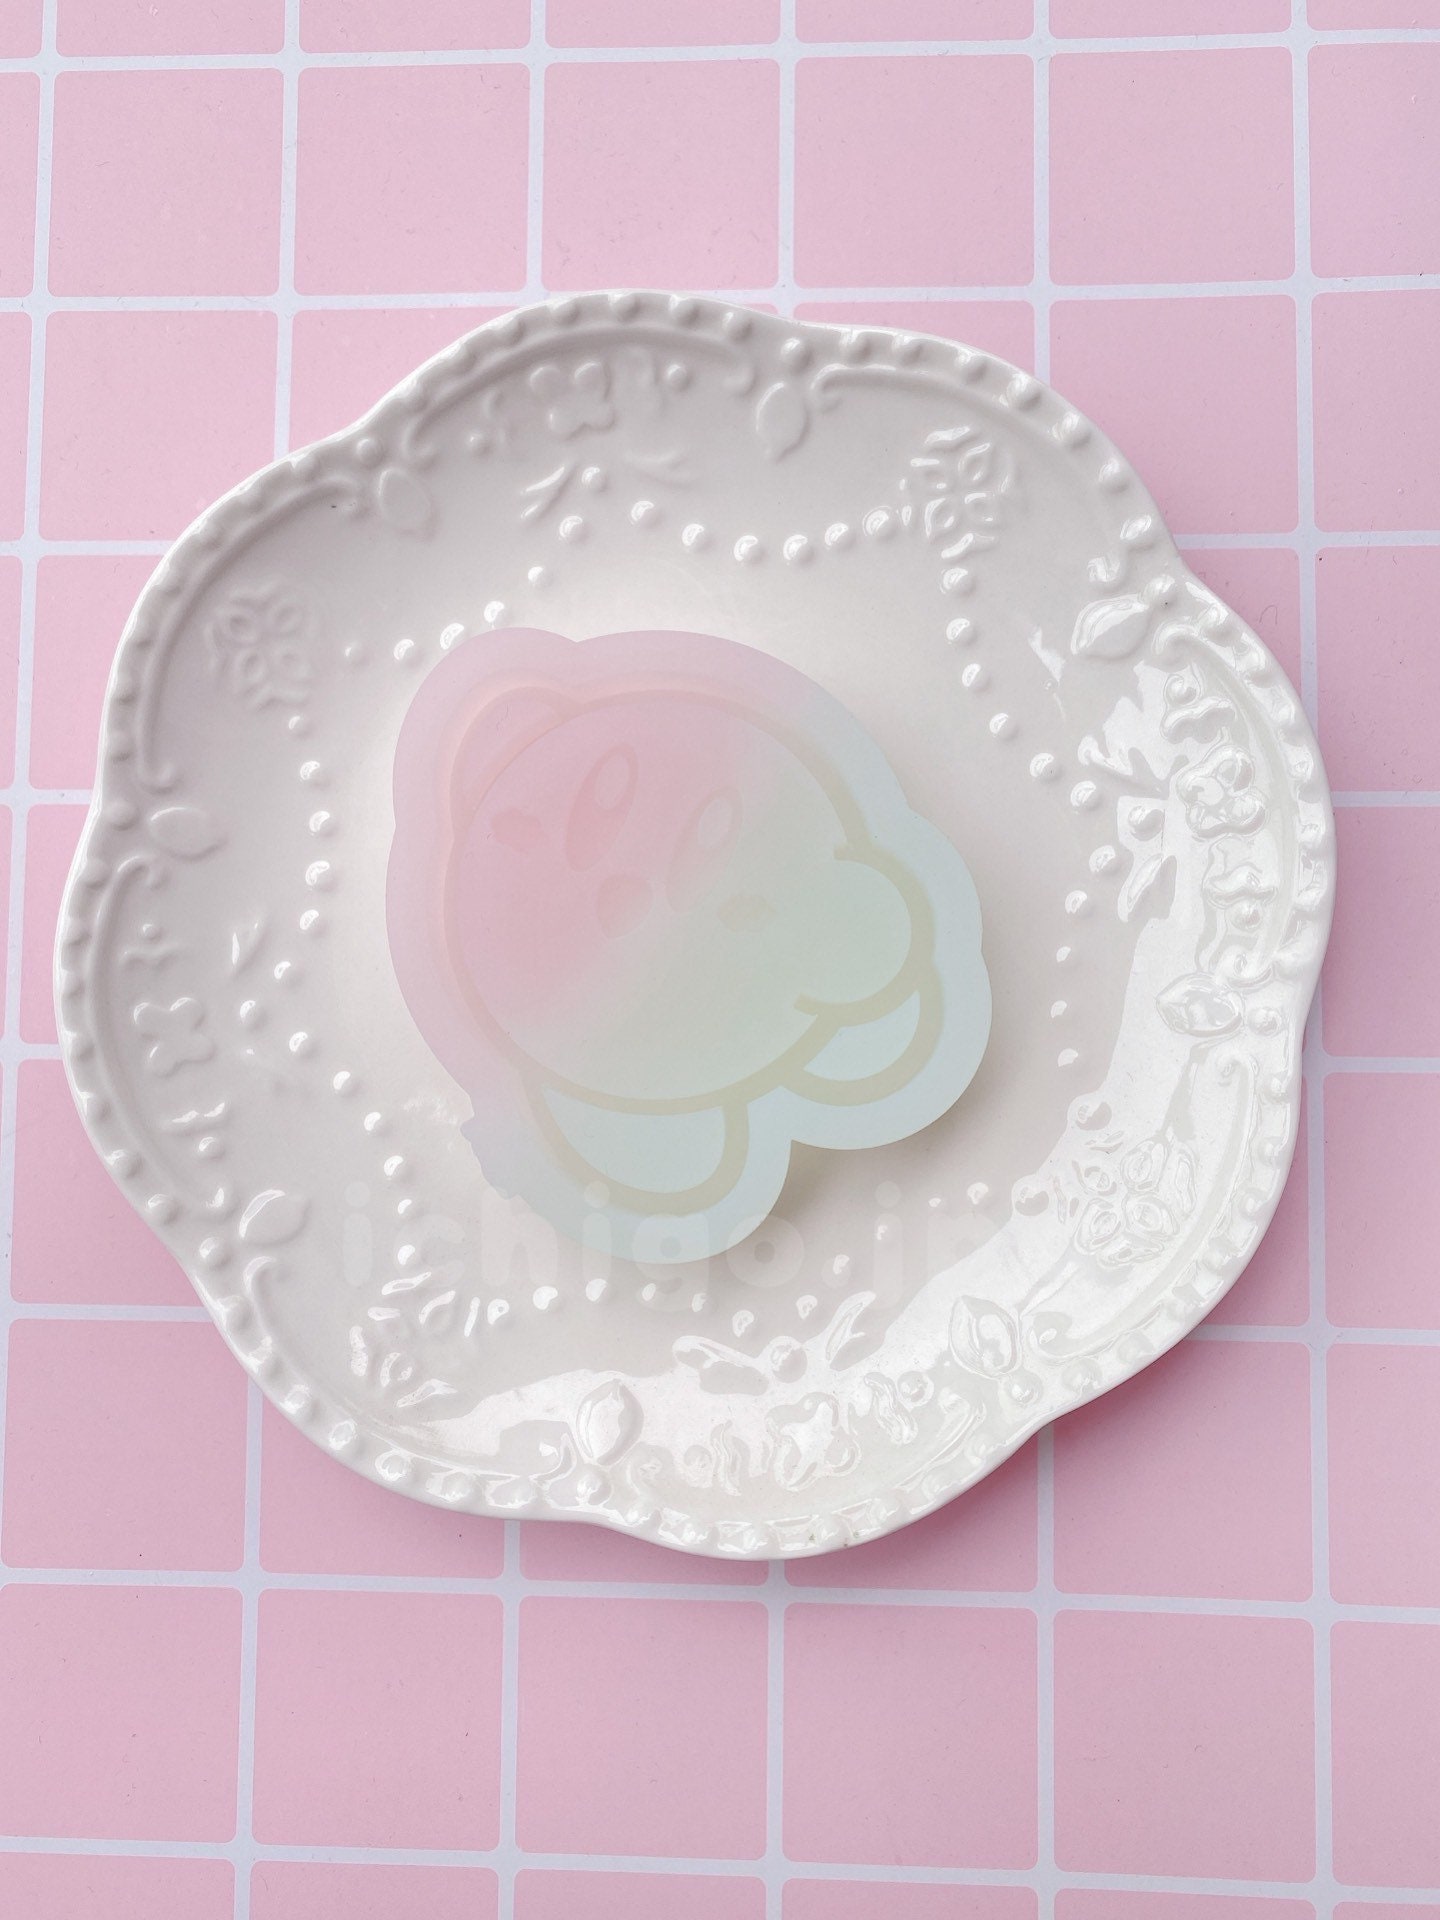 Resin Shaker Mold : Kawaii Cute Resin Silicone Mould , Resin Craft